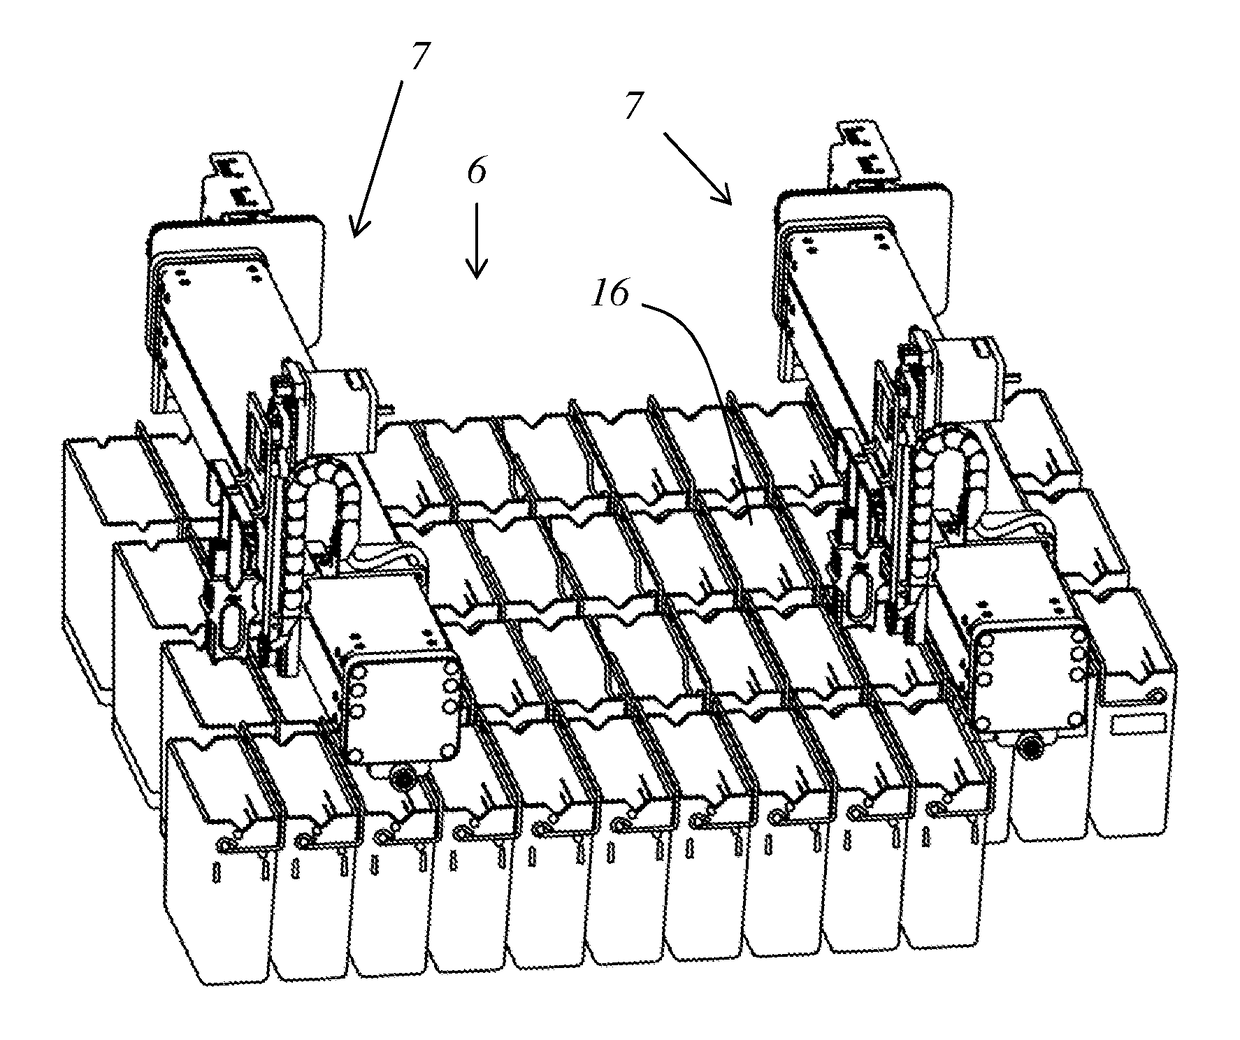 Treatment device for treating histological or cytological samples